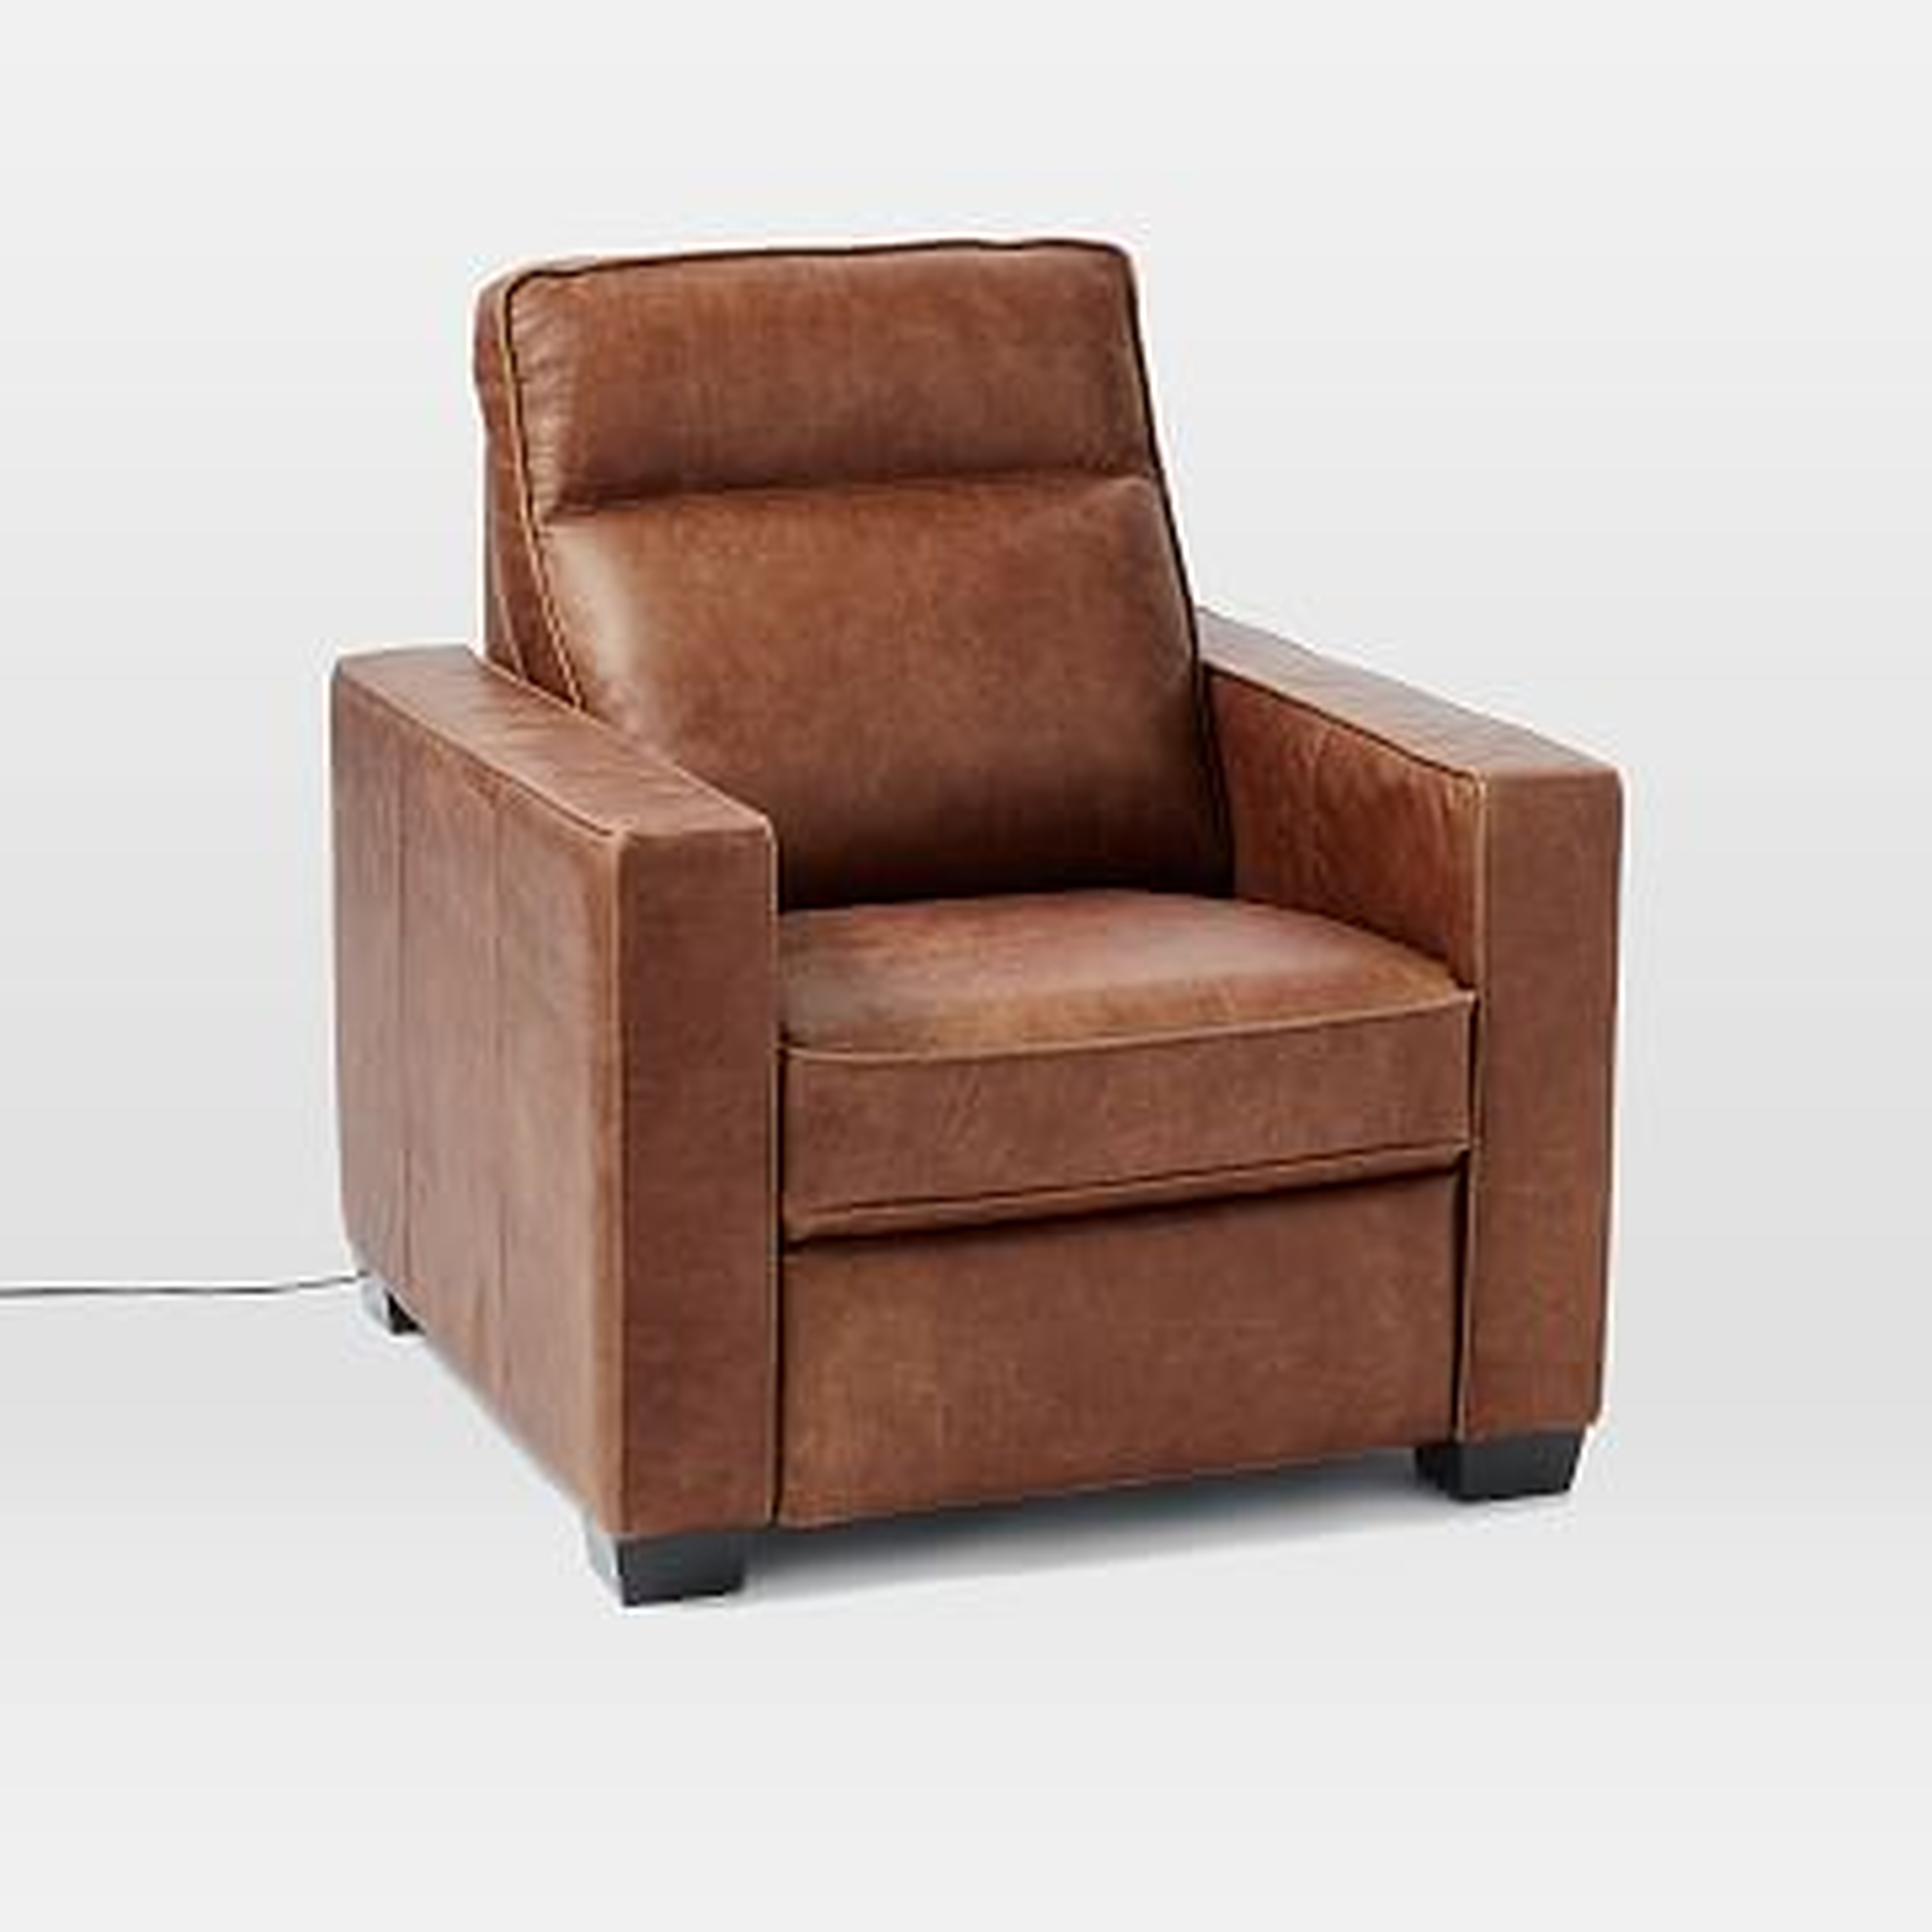 Henry(R) Leather Power Recliner Chair - Tobacco - West Elm